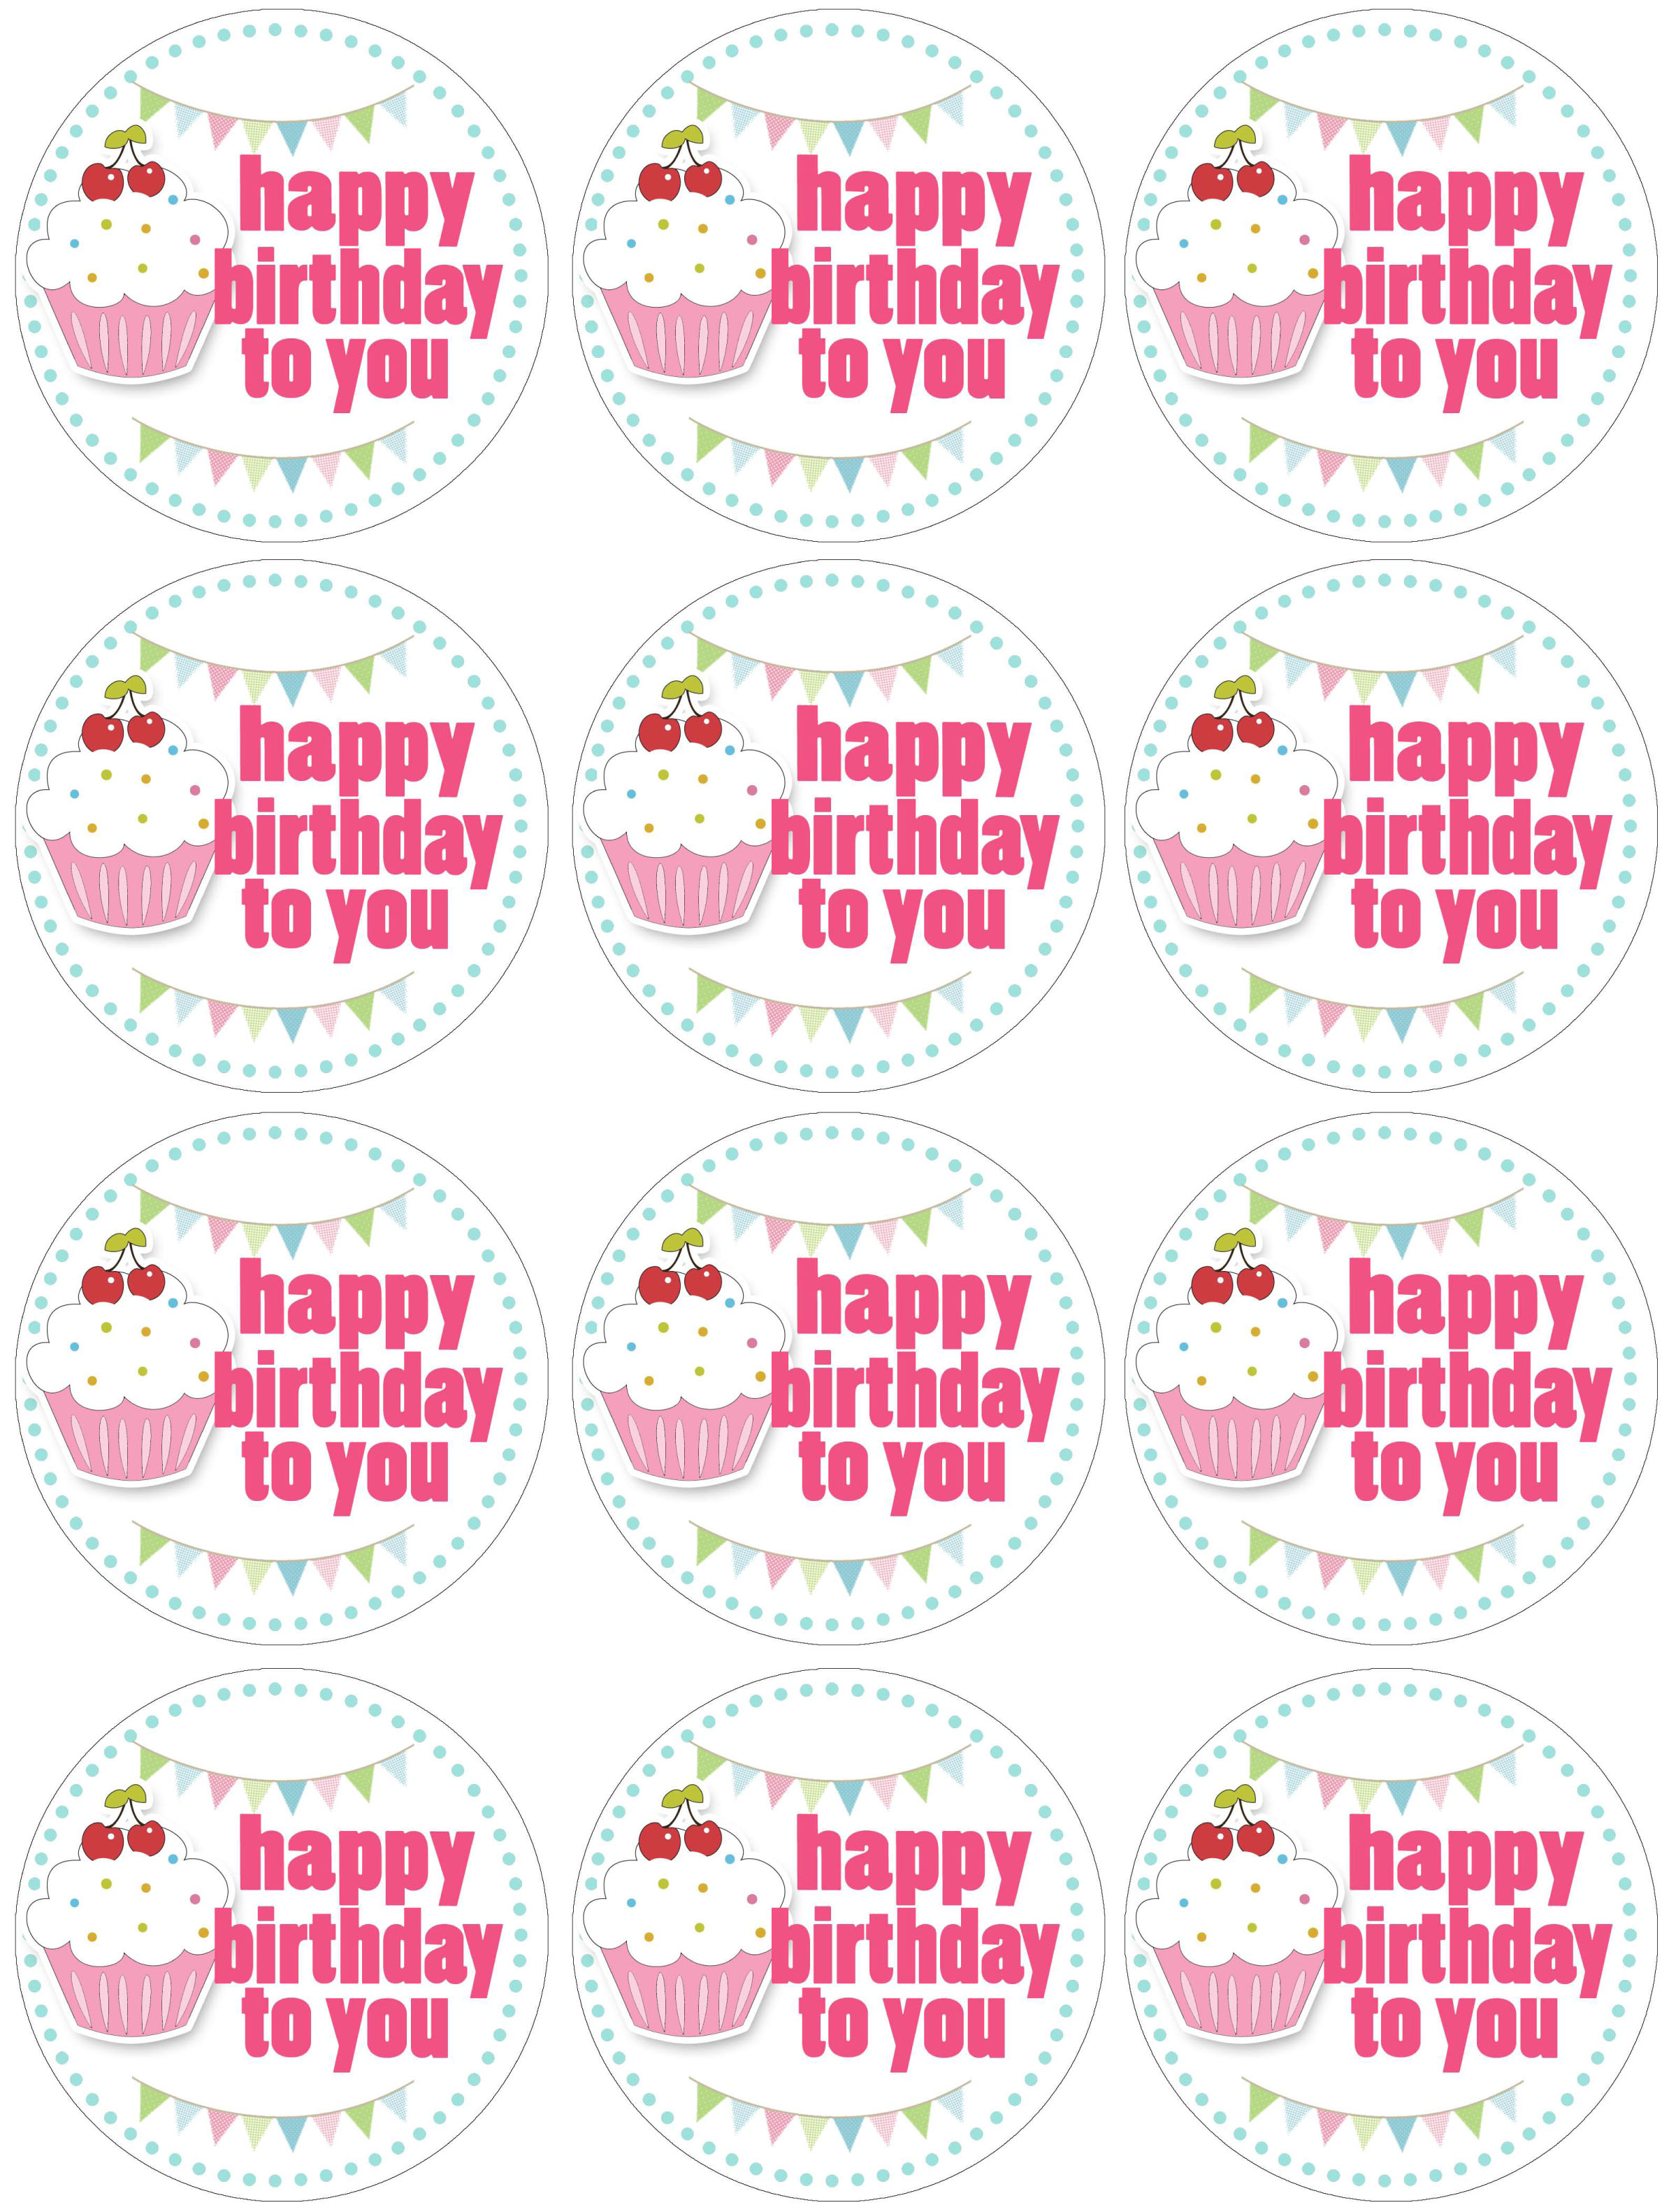 5-best-images-of-free-printable-birthday-cupcake-topper-templates